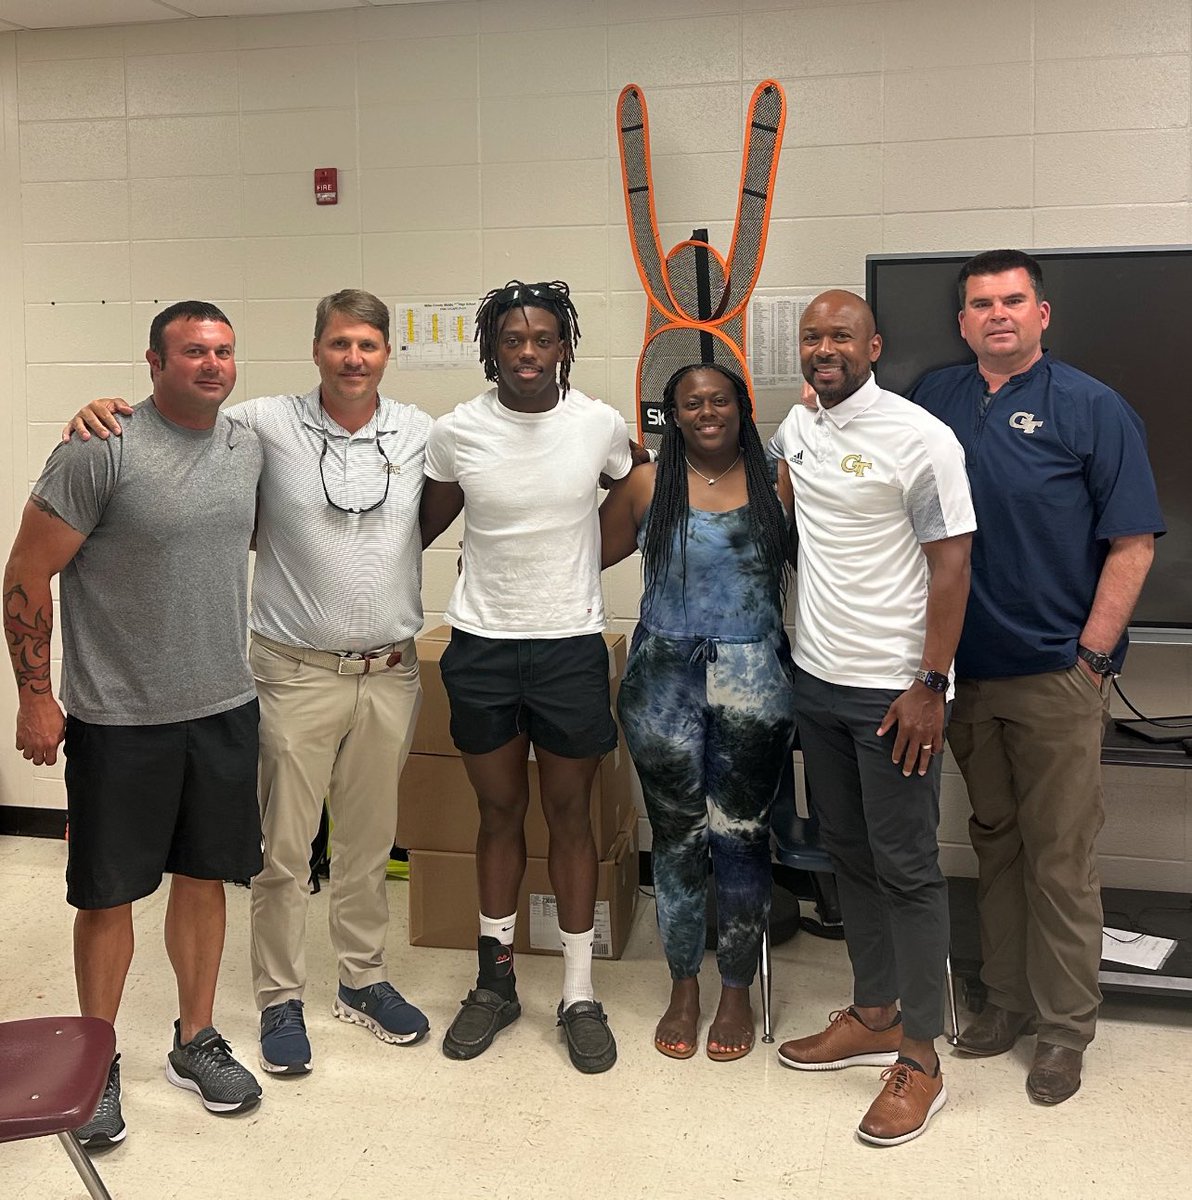 Thank you @coach_norv @Buster_Faulkner and @GeepWade for stopping in to see me. The support is much appreciated. @GeorgiaTechFB @GeorgiaTech @RivalsJohnson @gapanther @MrTNT21 @kezmccorvey @causey_tom @millerpirates